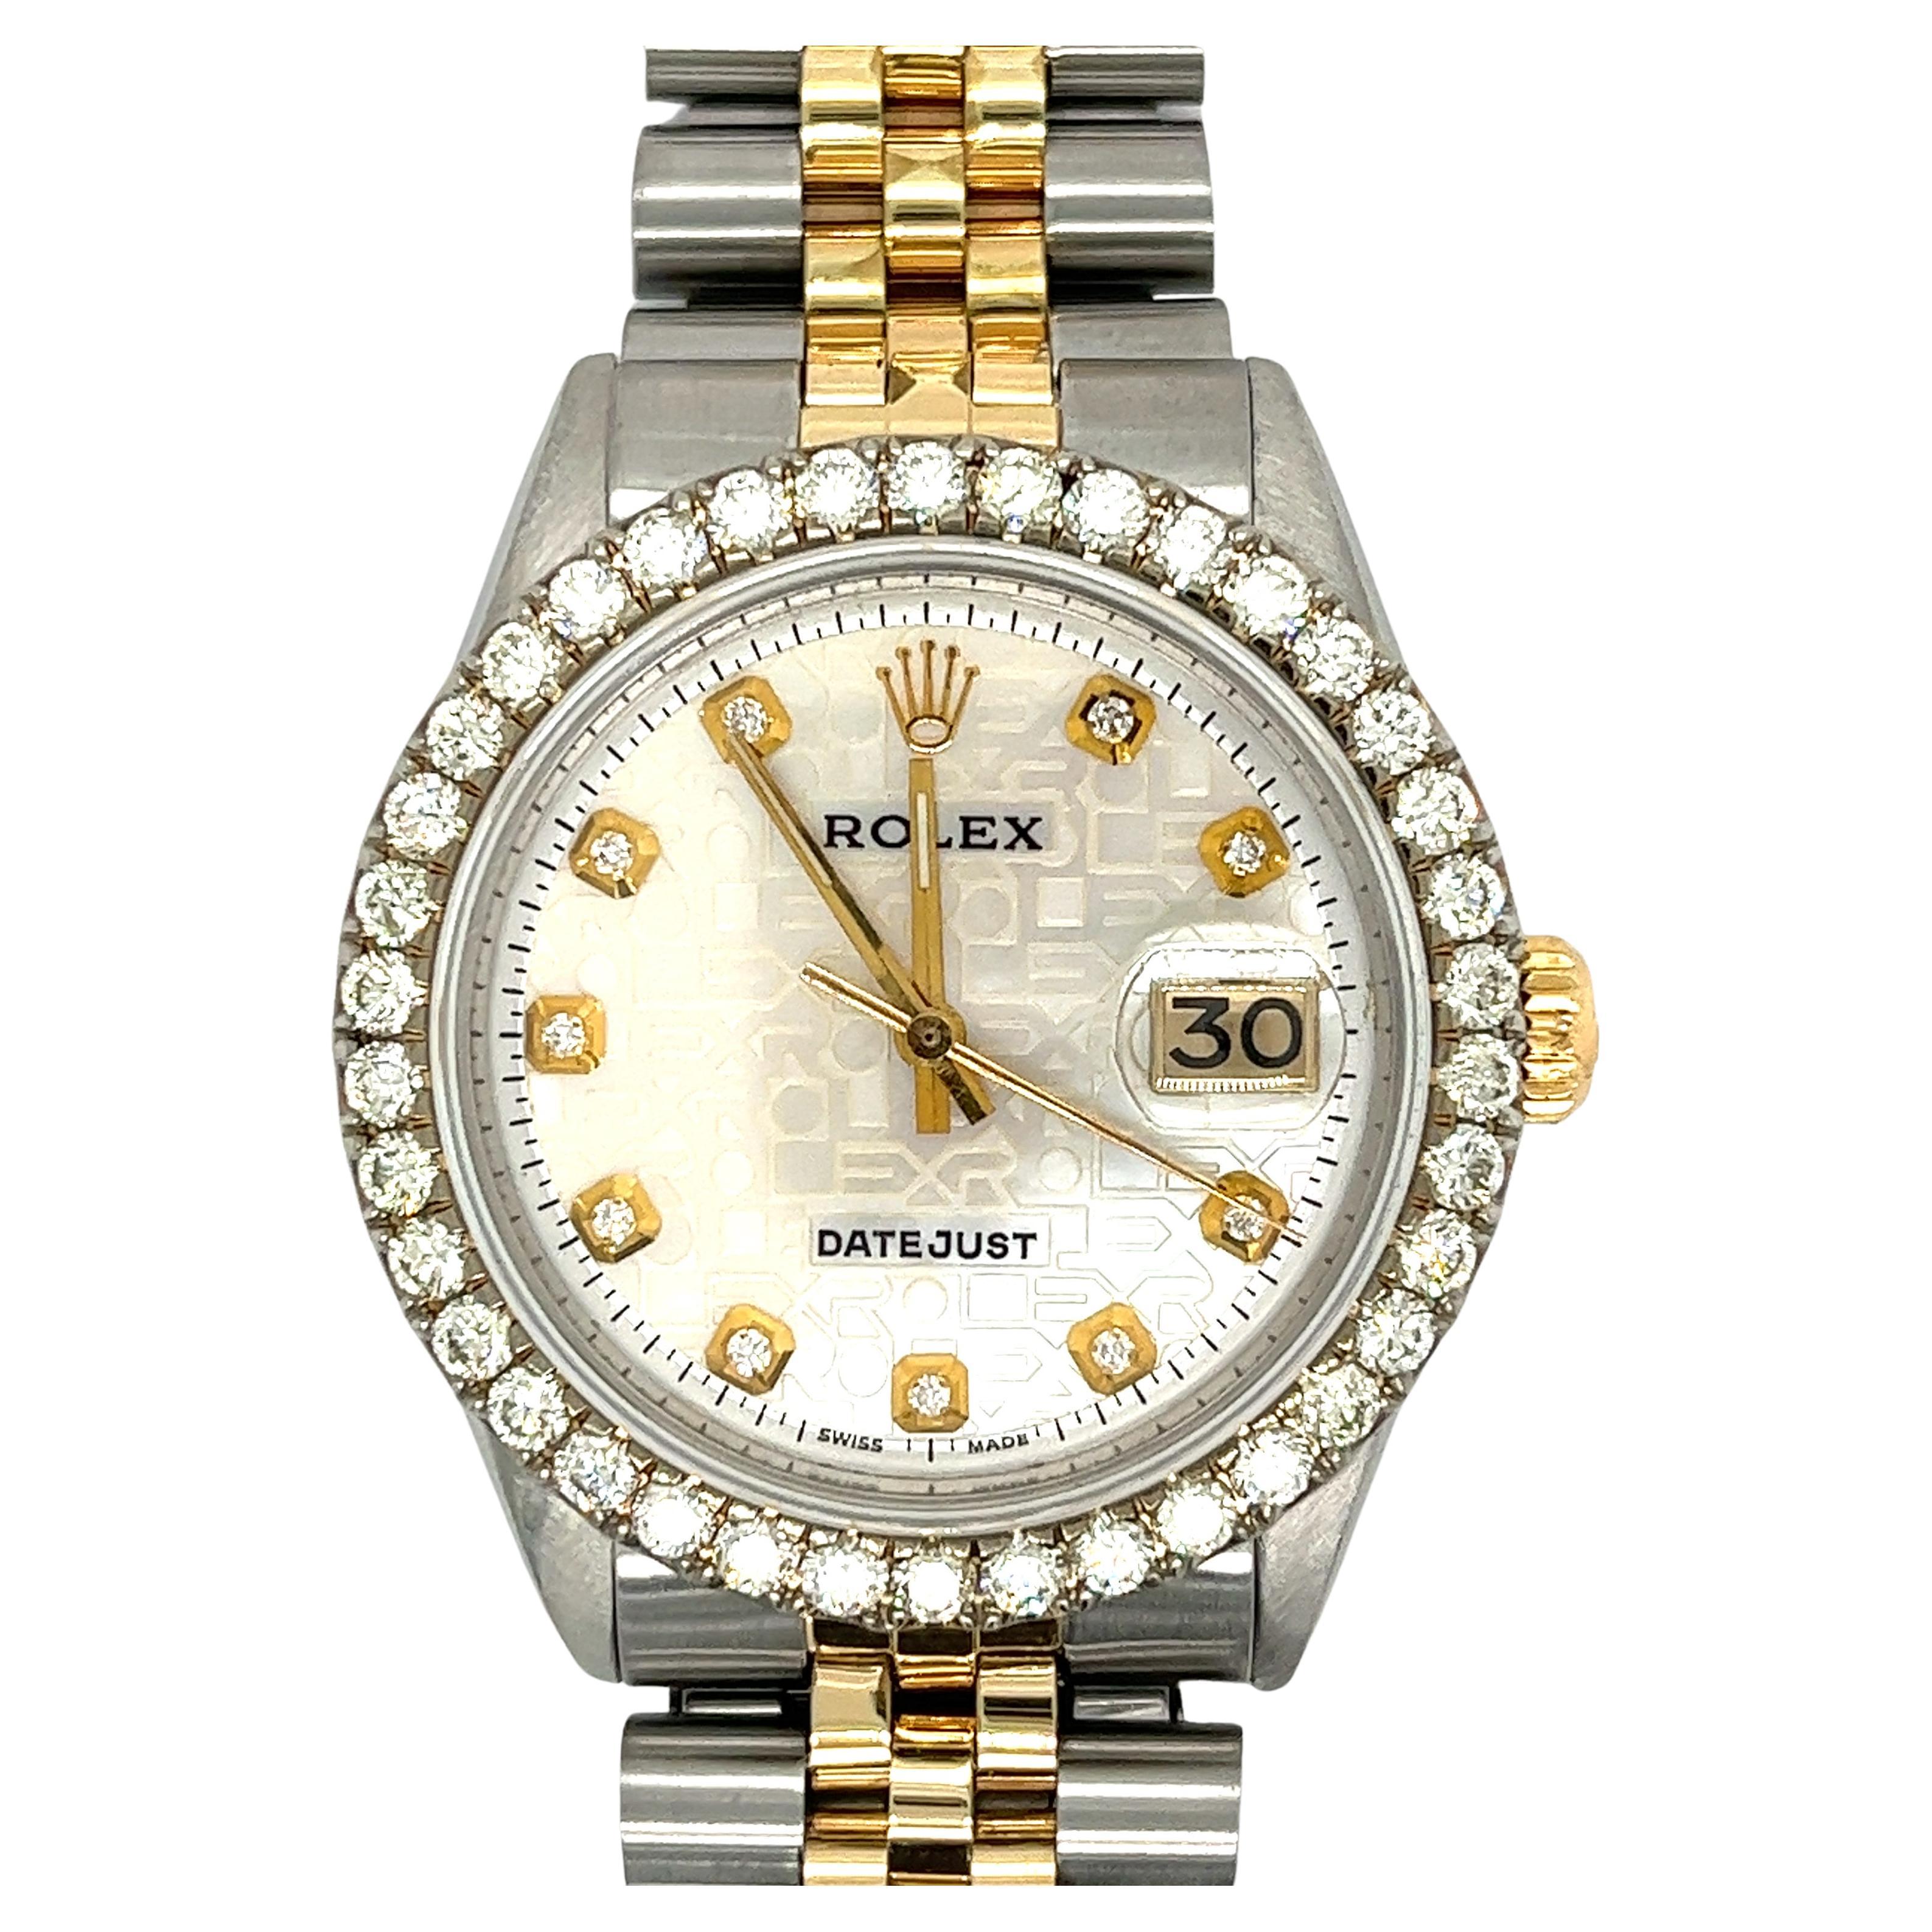 Rolex 2-Tone Date Just White Jubilee Dial Ref. 1601 With Diamond Bezel For Sale